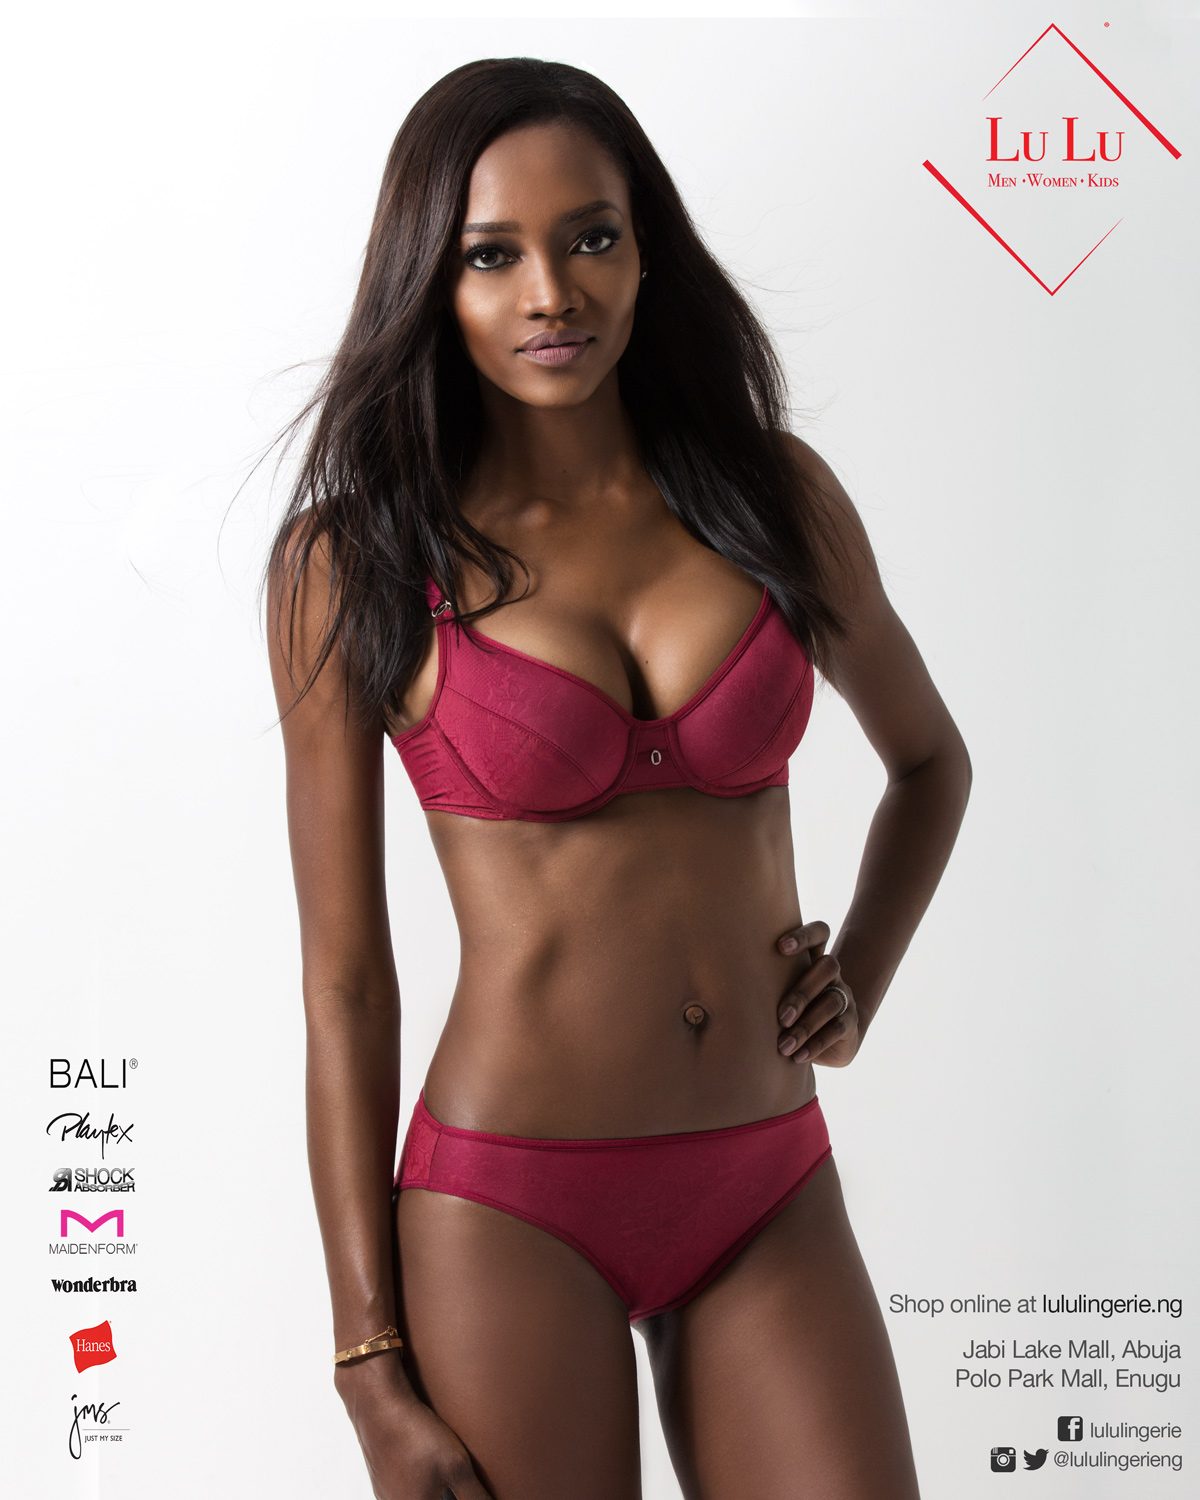 Oluchi Onweagba Orlandi photographed for a Lulu Lingerie ad campaign by Remi Adetiba